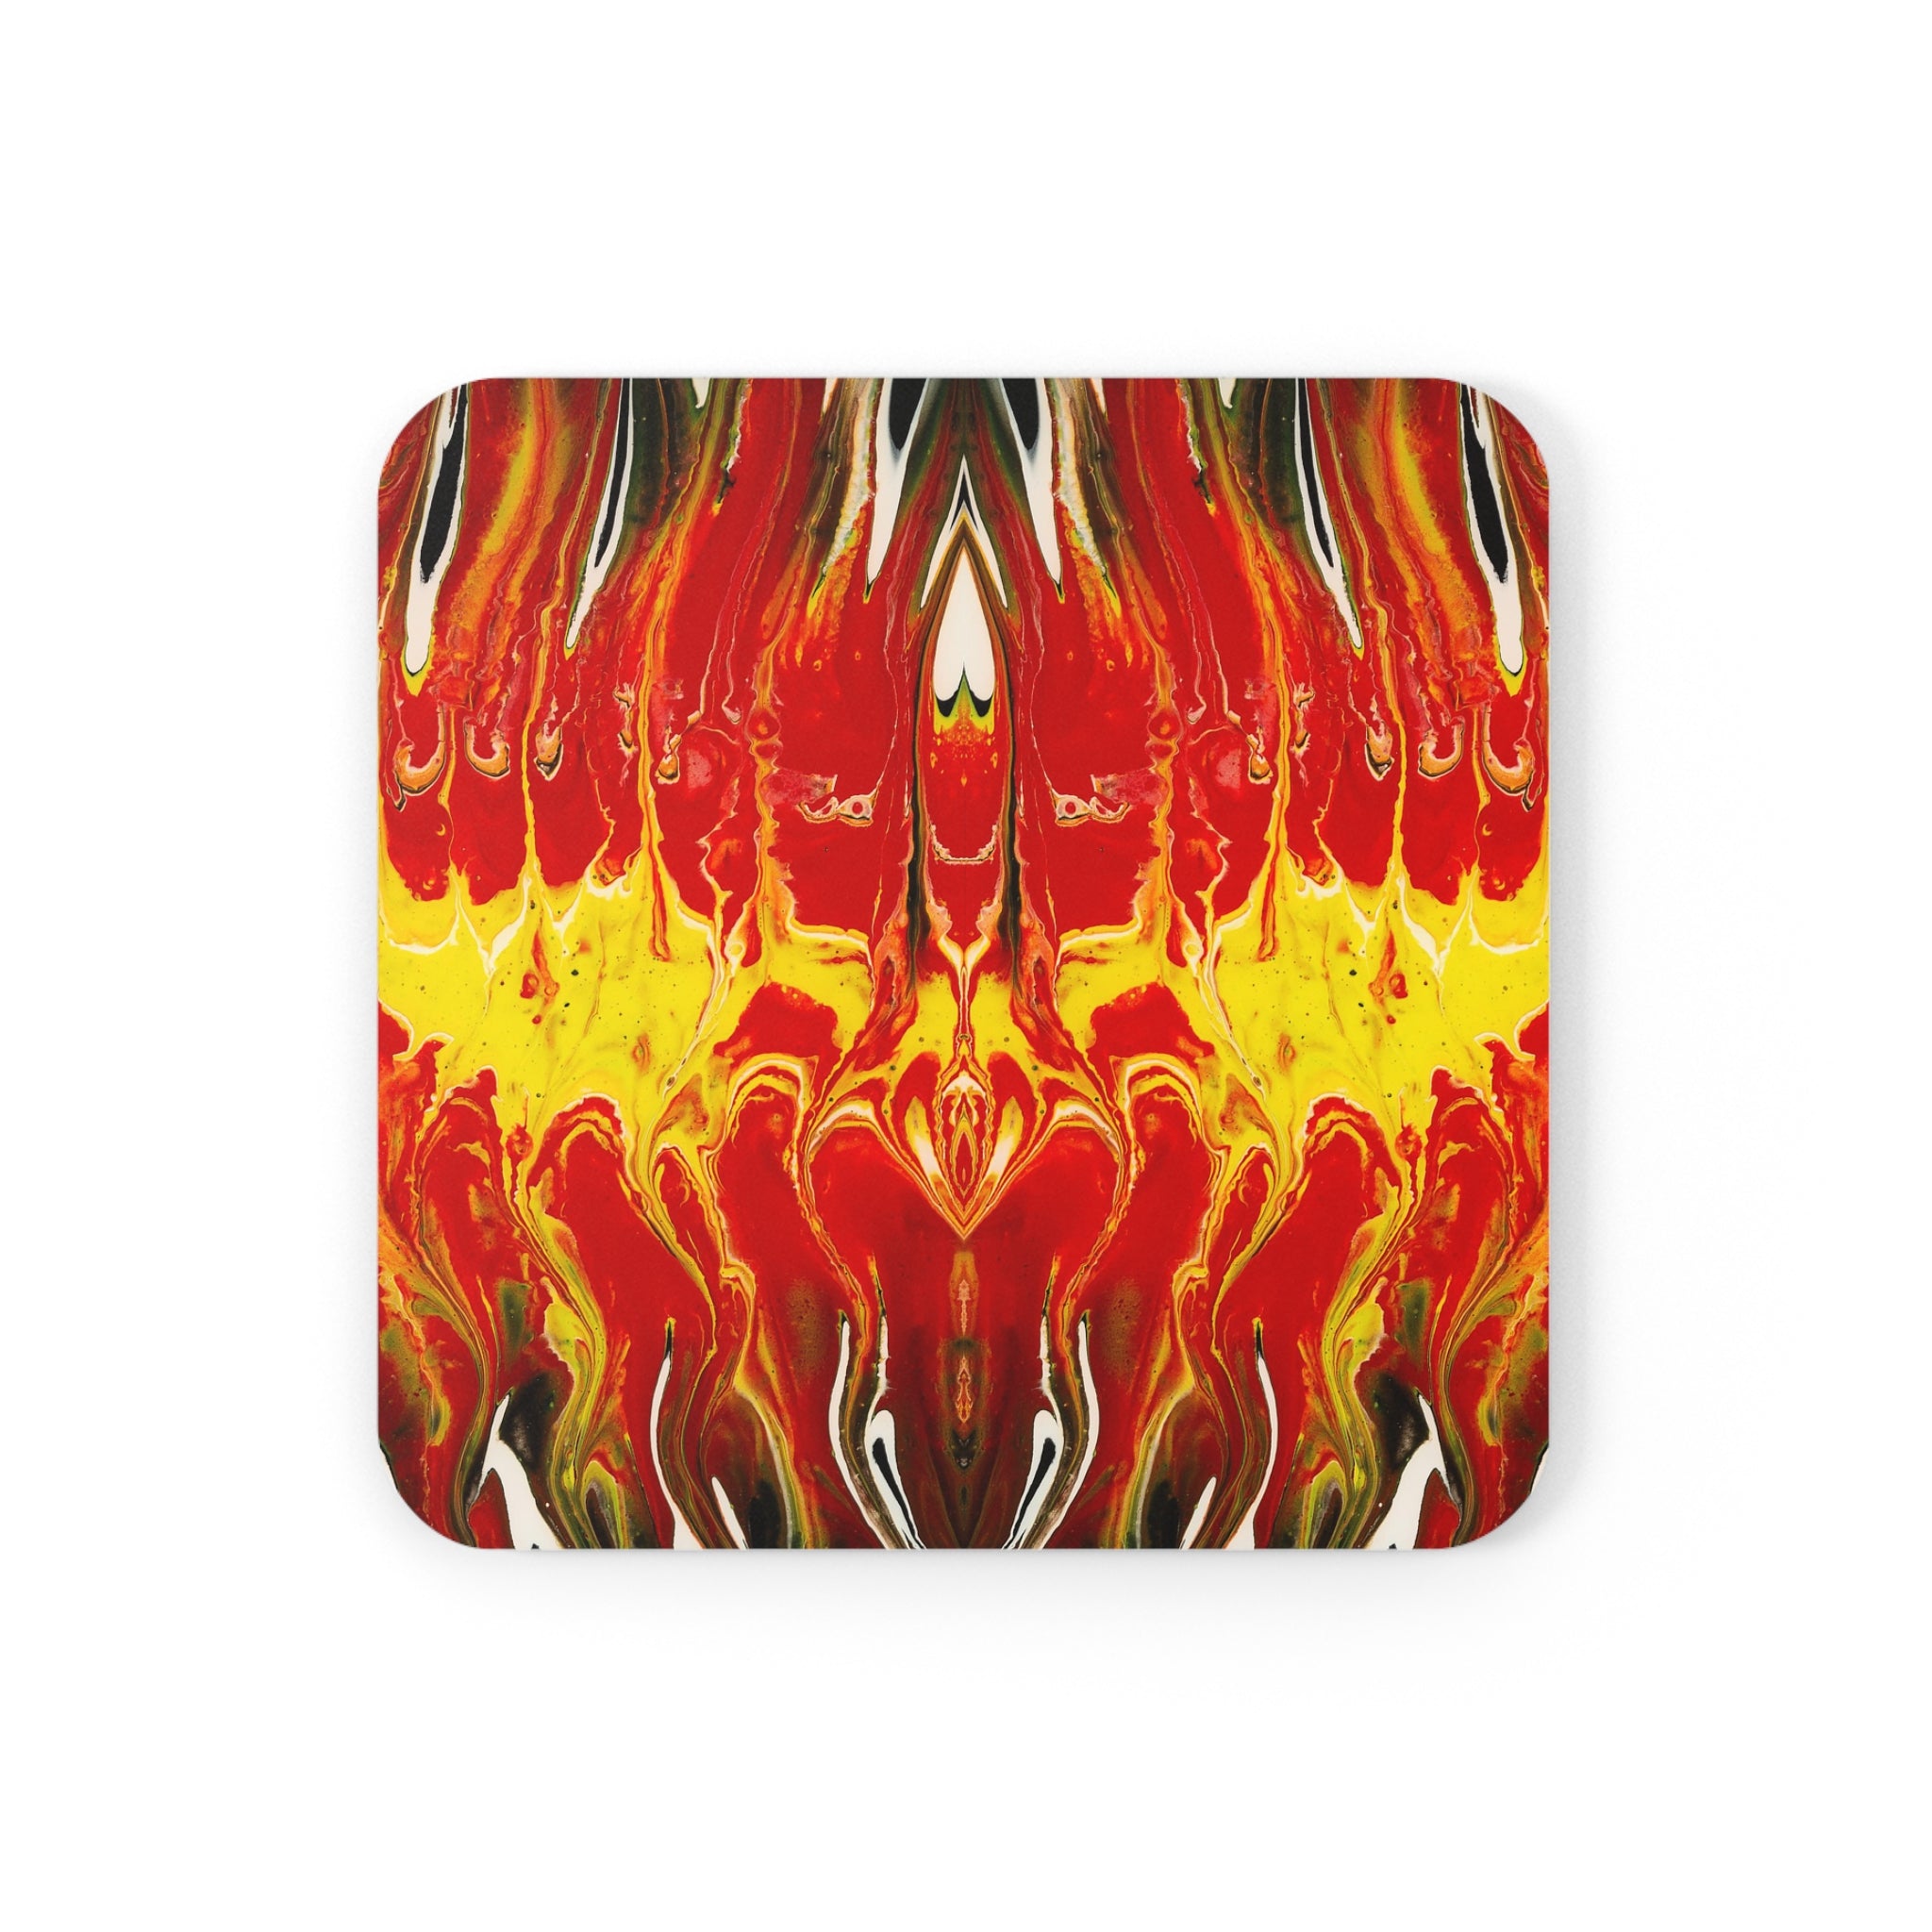 Cameron Creations - Internal Flames - Stylish Coffee Coaster - Square Front